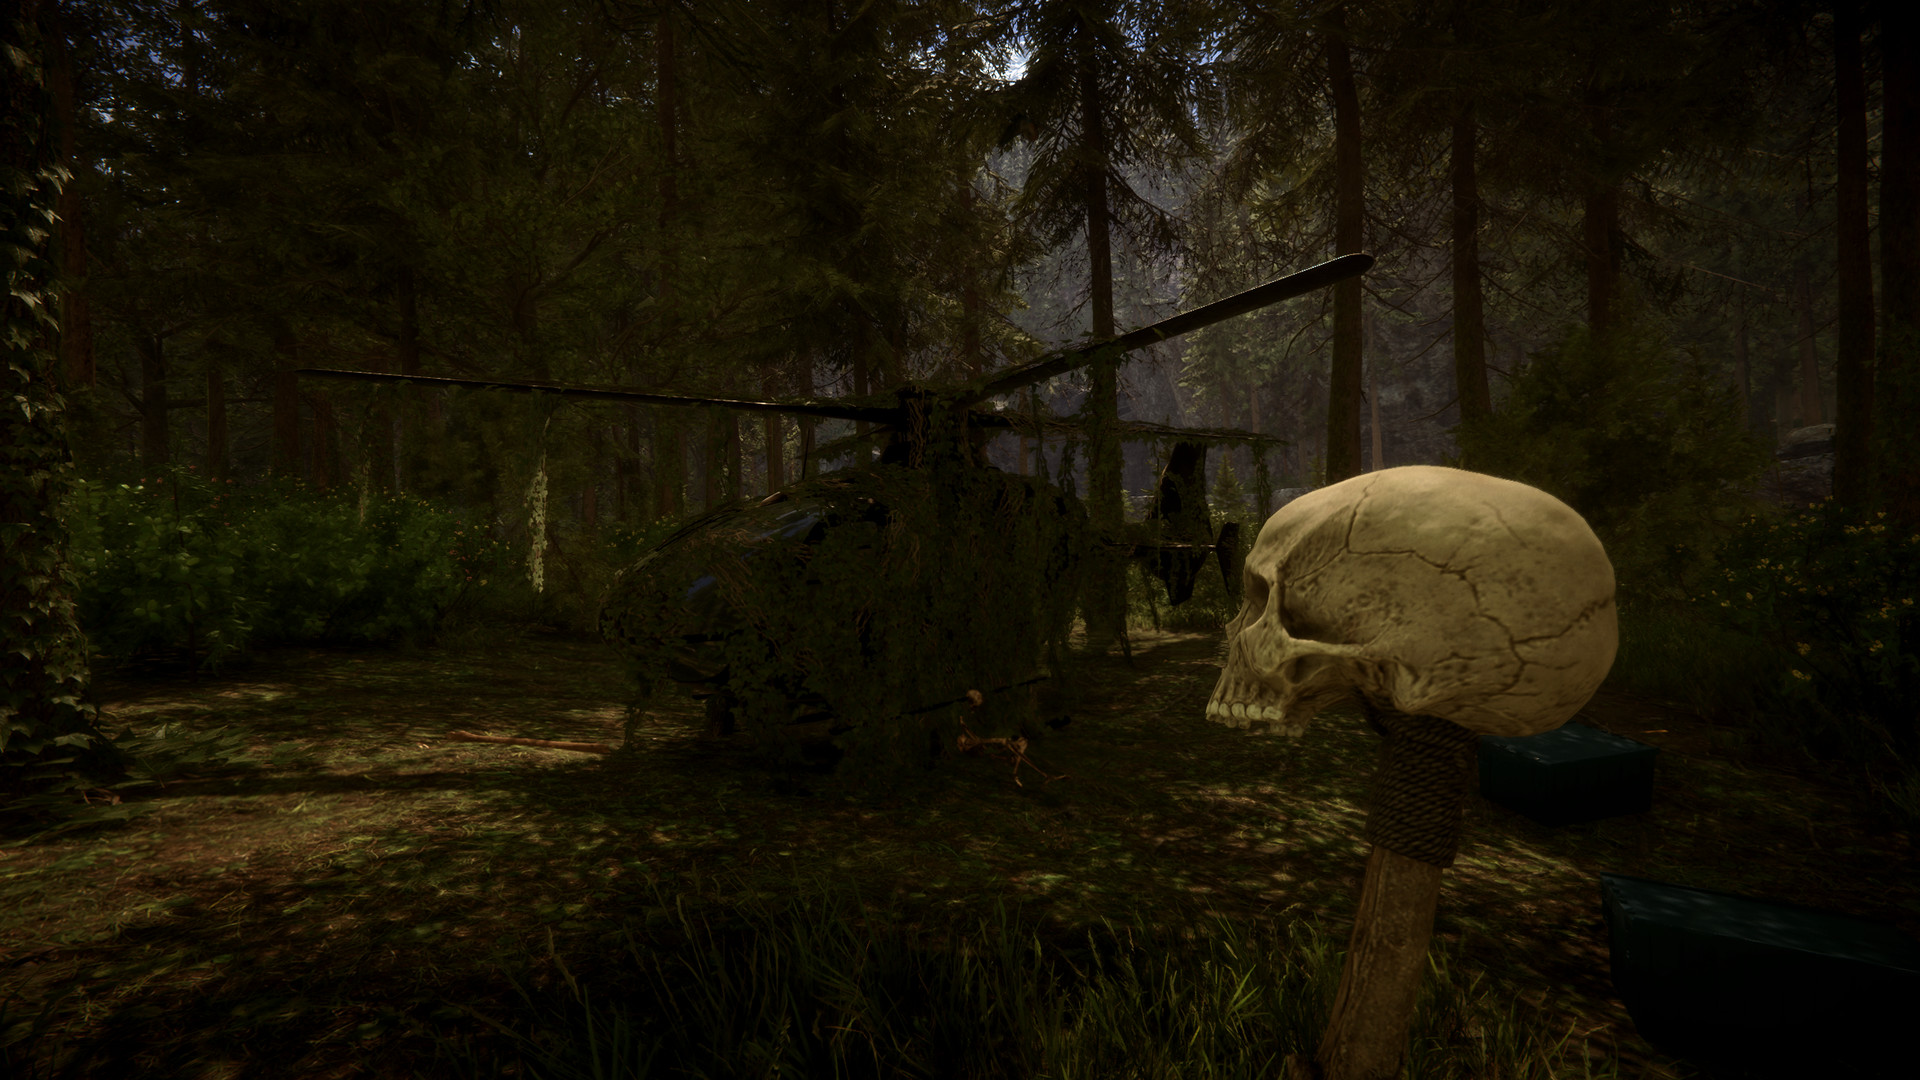 Sons of the Forest release time, price, download size revealed; Is